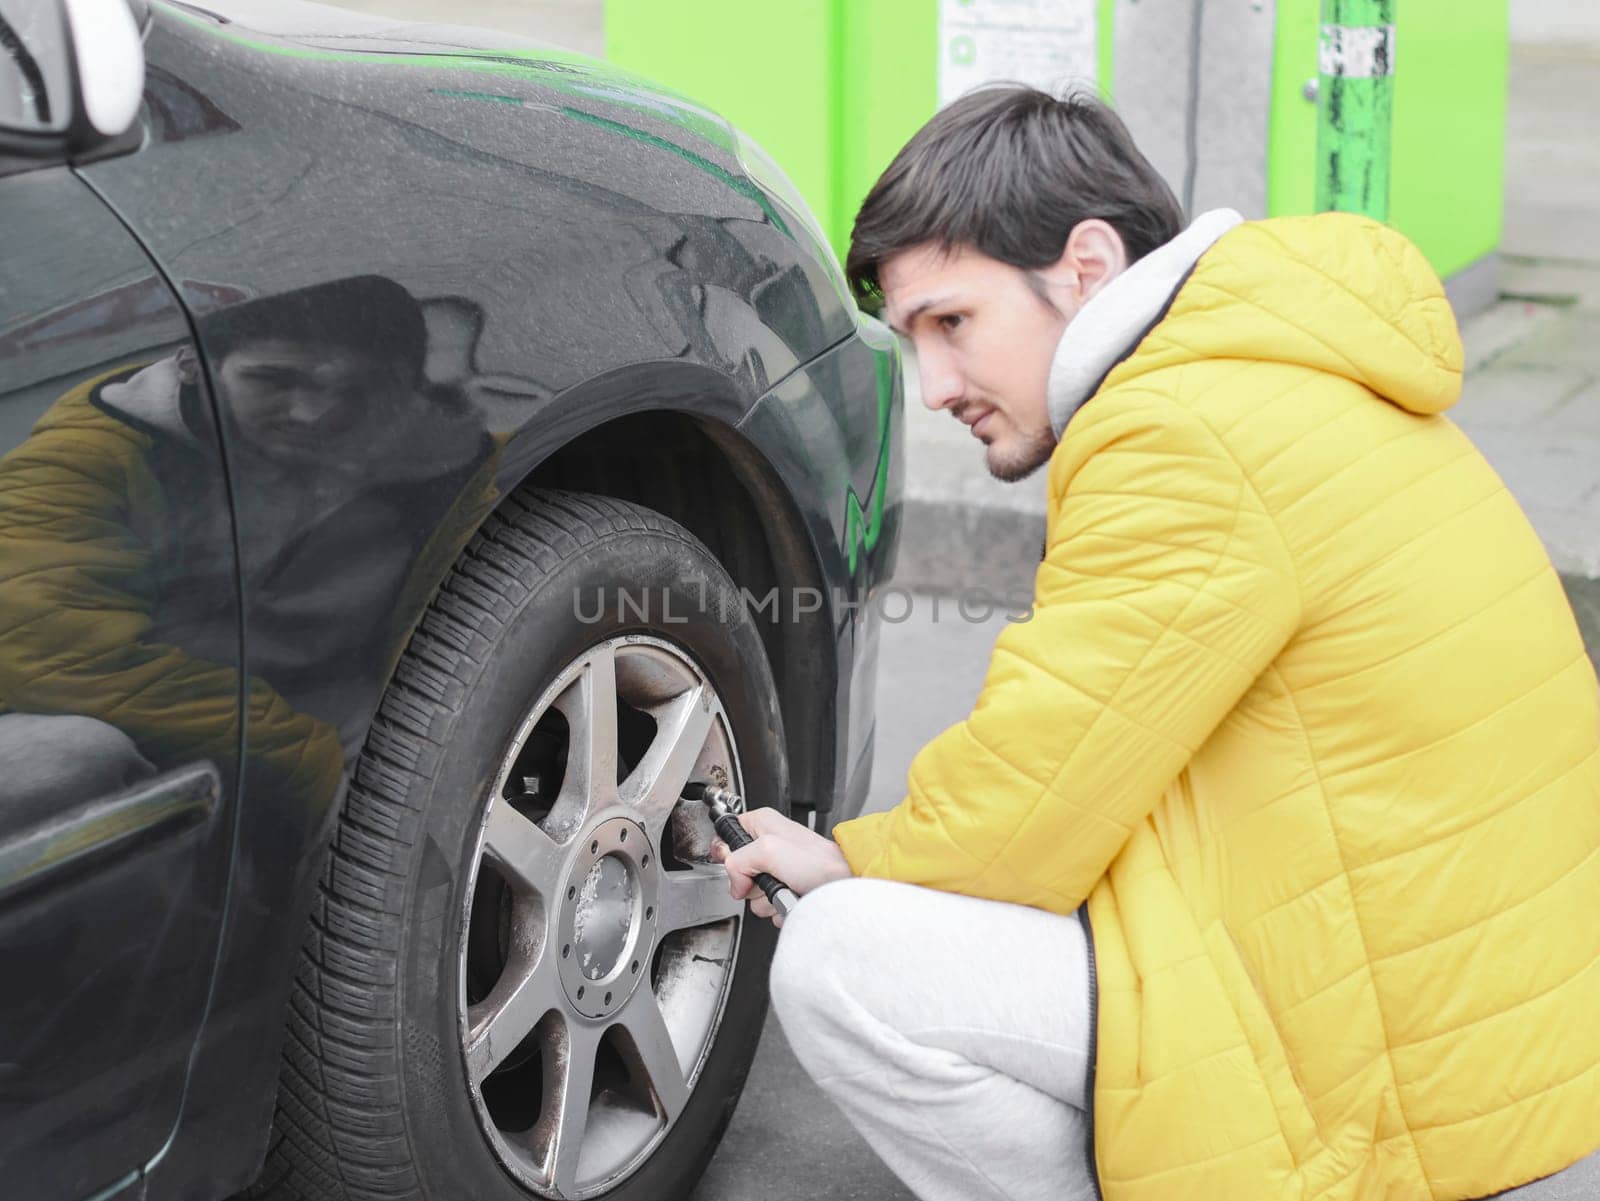 Young caucasian man in a yellow jacket and gray sweatpants, squatting thoughtfully, pumps air into the wheel of a car with an air compressor in a parking lot, side view with selective focus and closeup.Gas station concept.